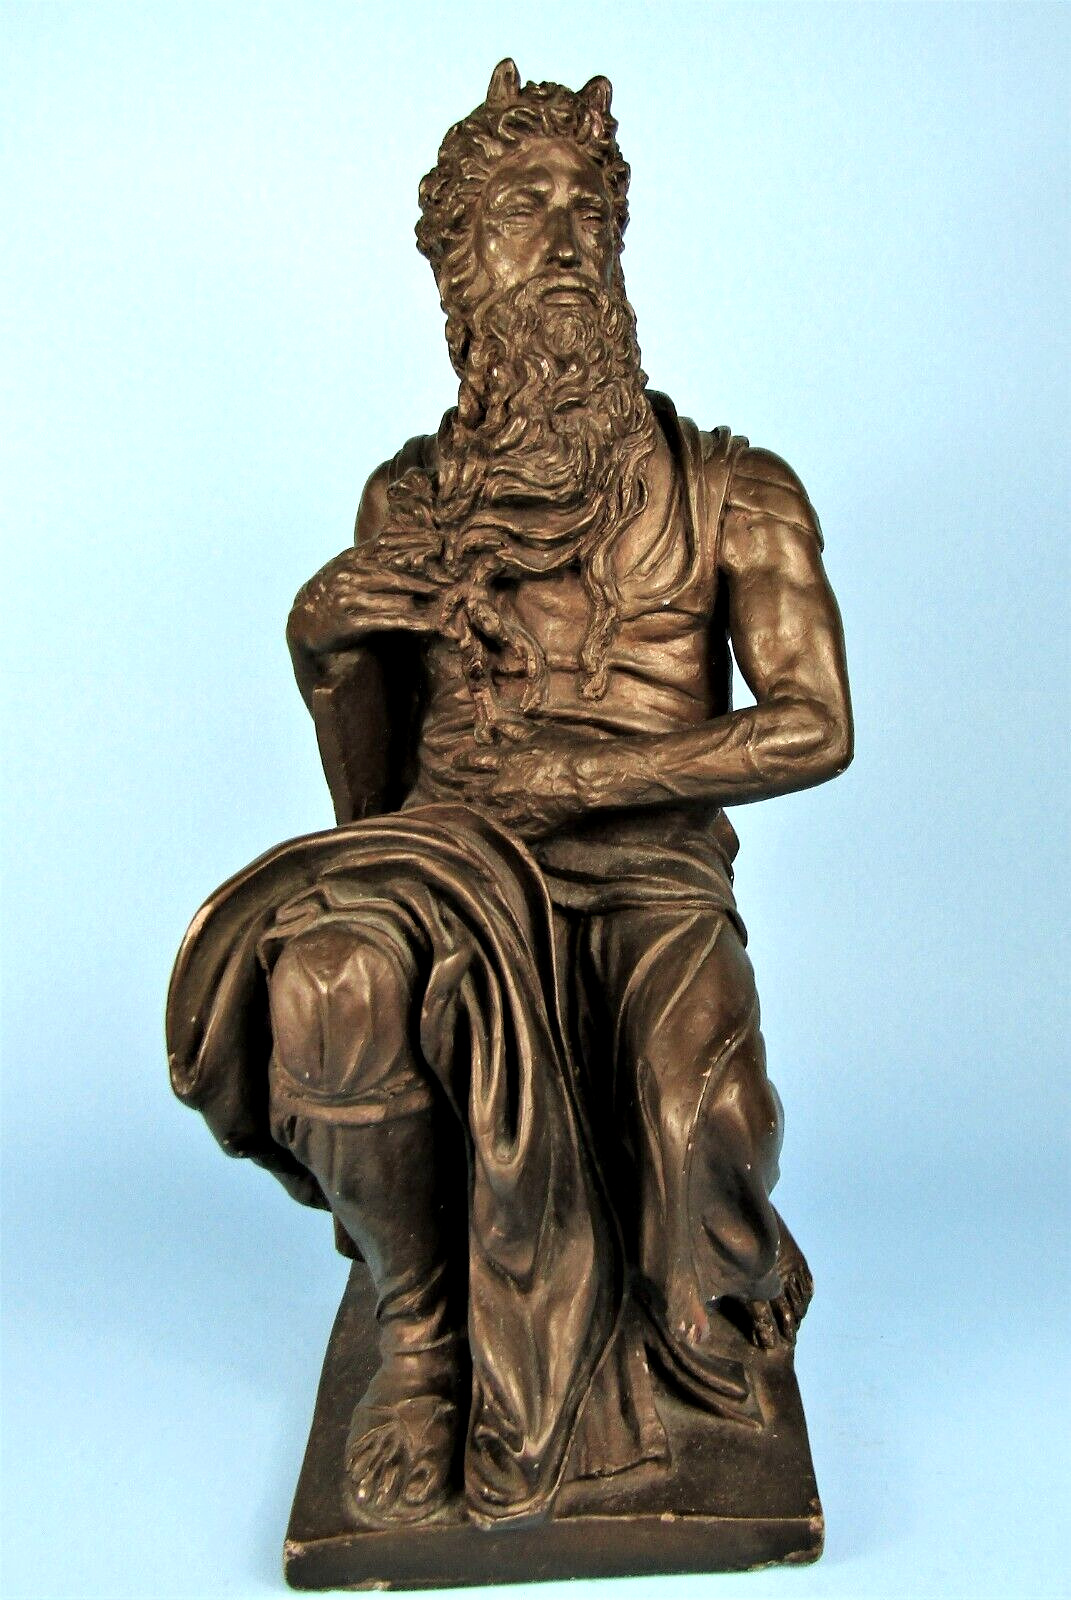 MOSES SCULPTURE by MICHELANGELO BIG 15\